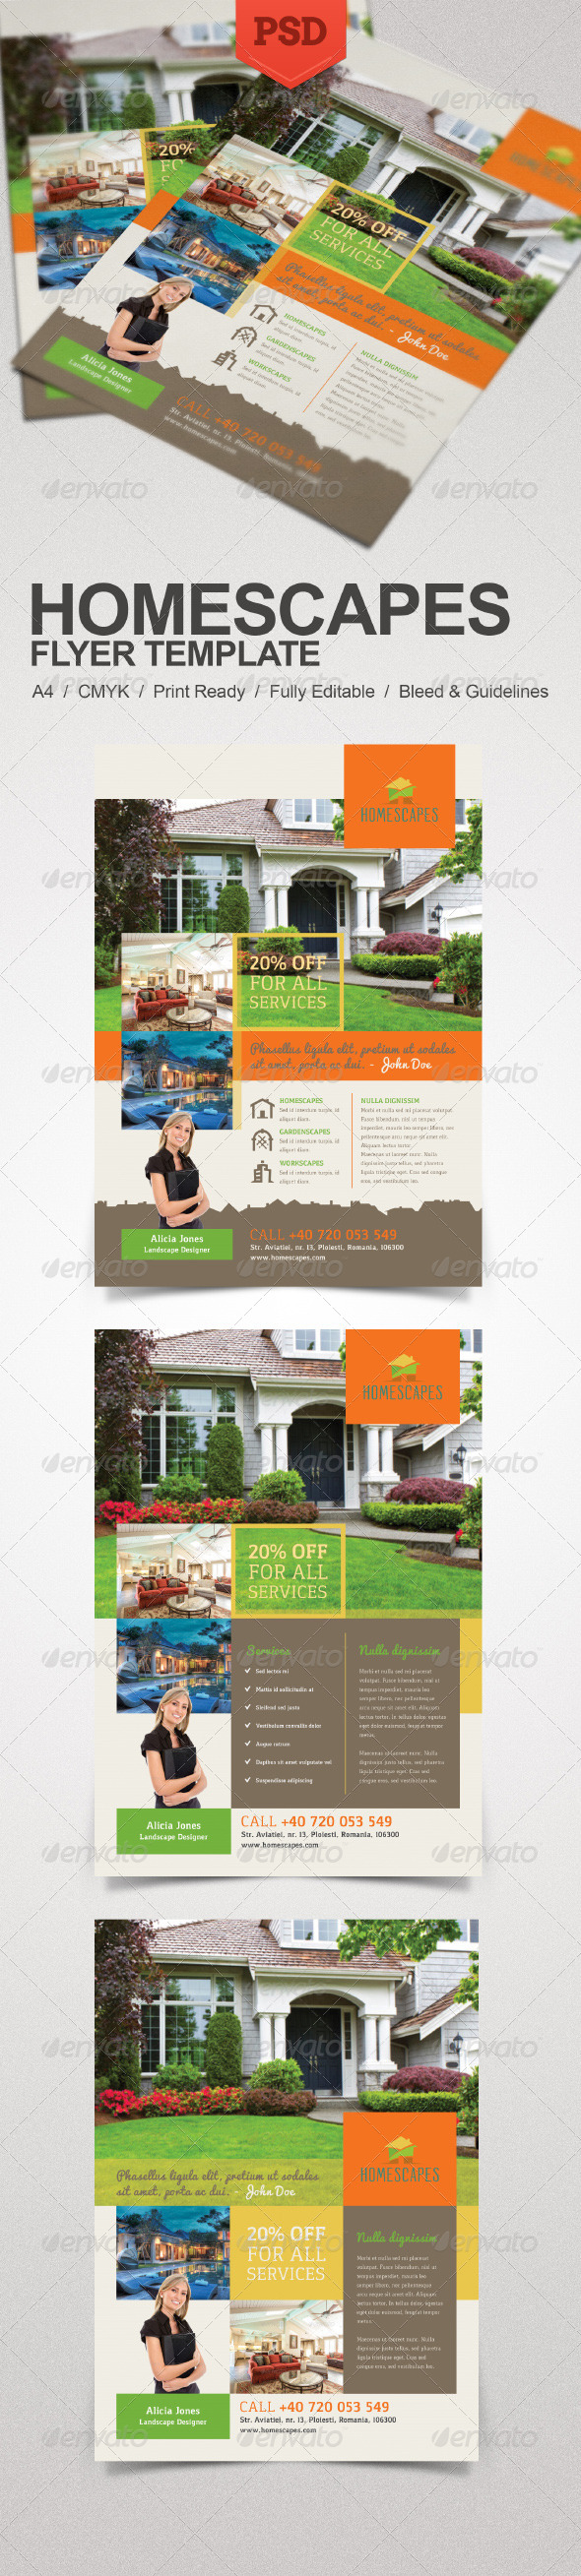 Real Estate and Homescapes Flyer